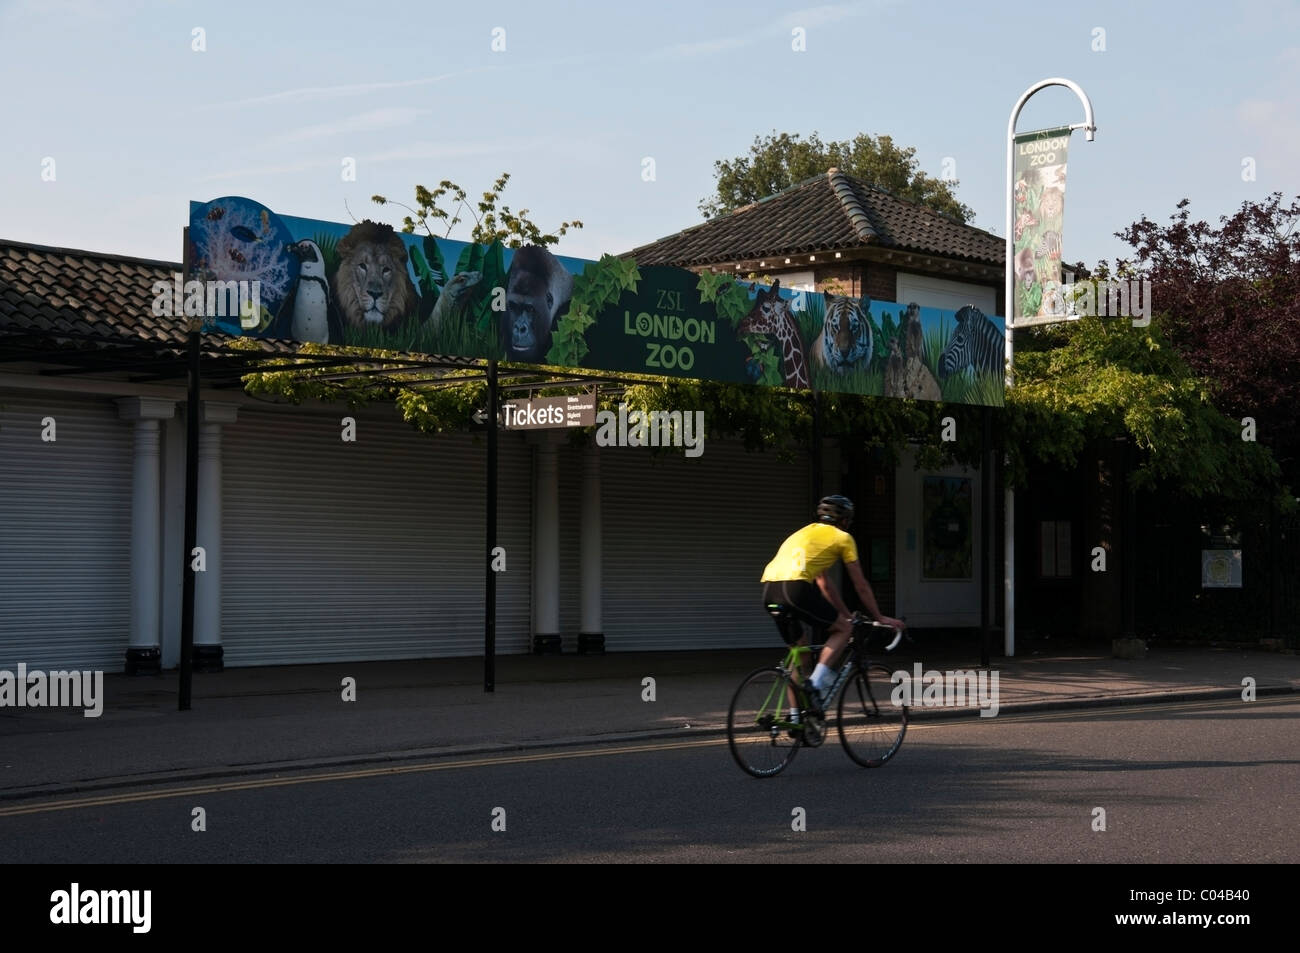 London Zoo sign, Zoological Gardens entrance and biker in yellow t-shirt, Regents Park, England, UK, Europe, EU Stock Photo